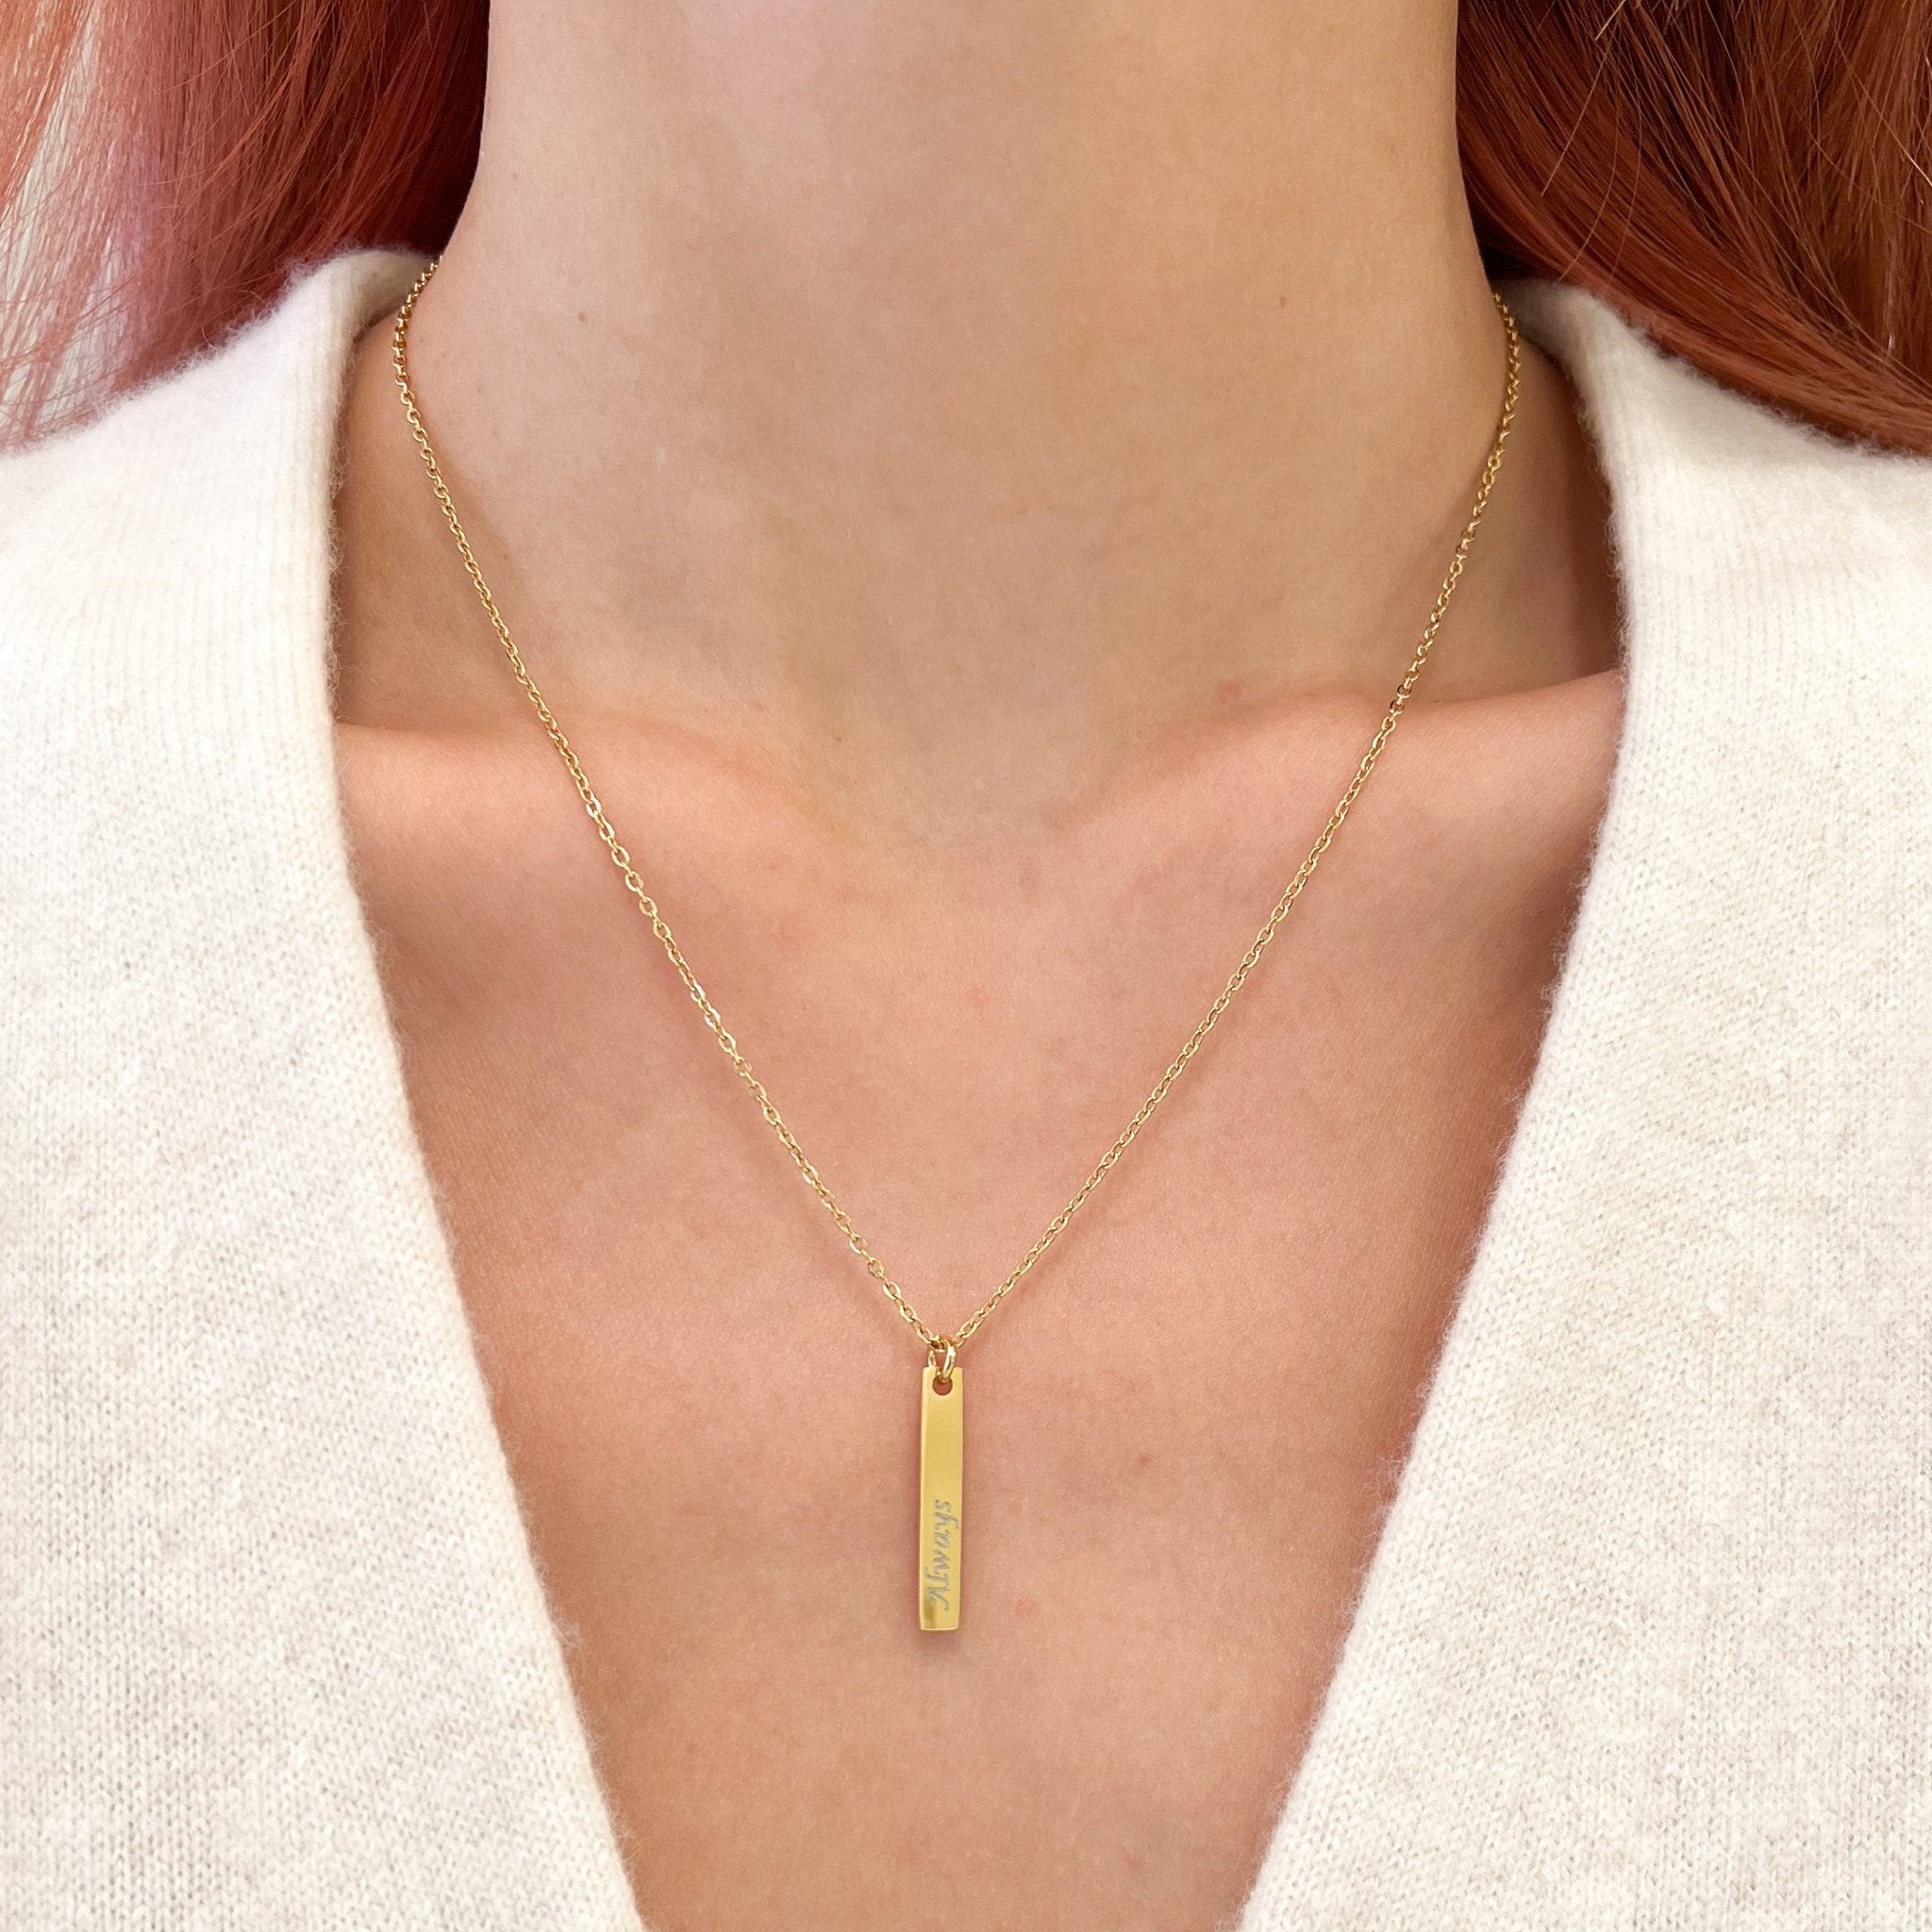 Simple Vertical Bar Necklace in Gold + Silver - Flaire & Co.